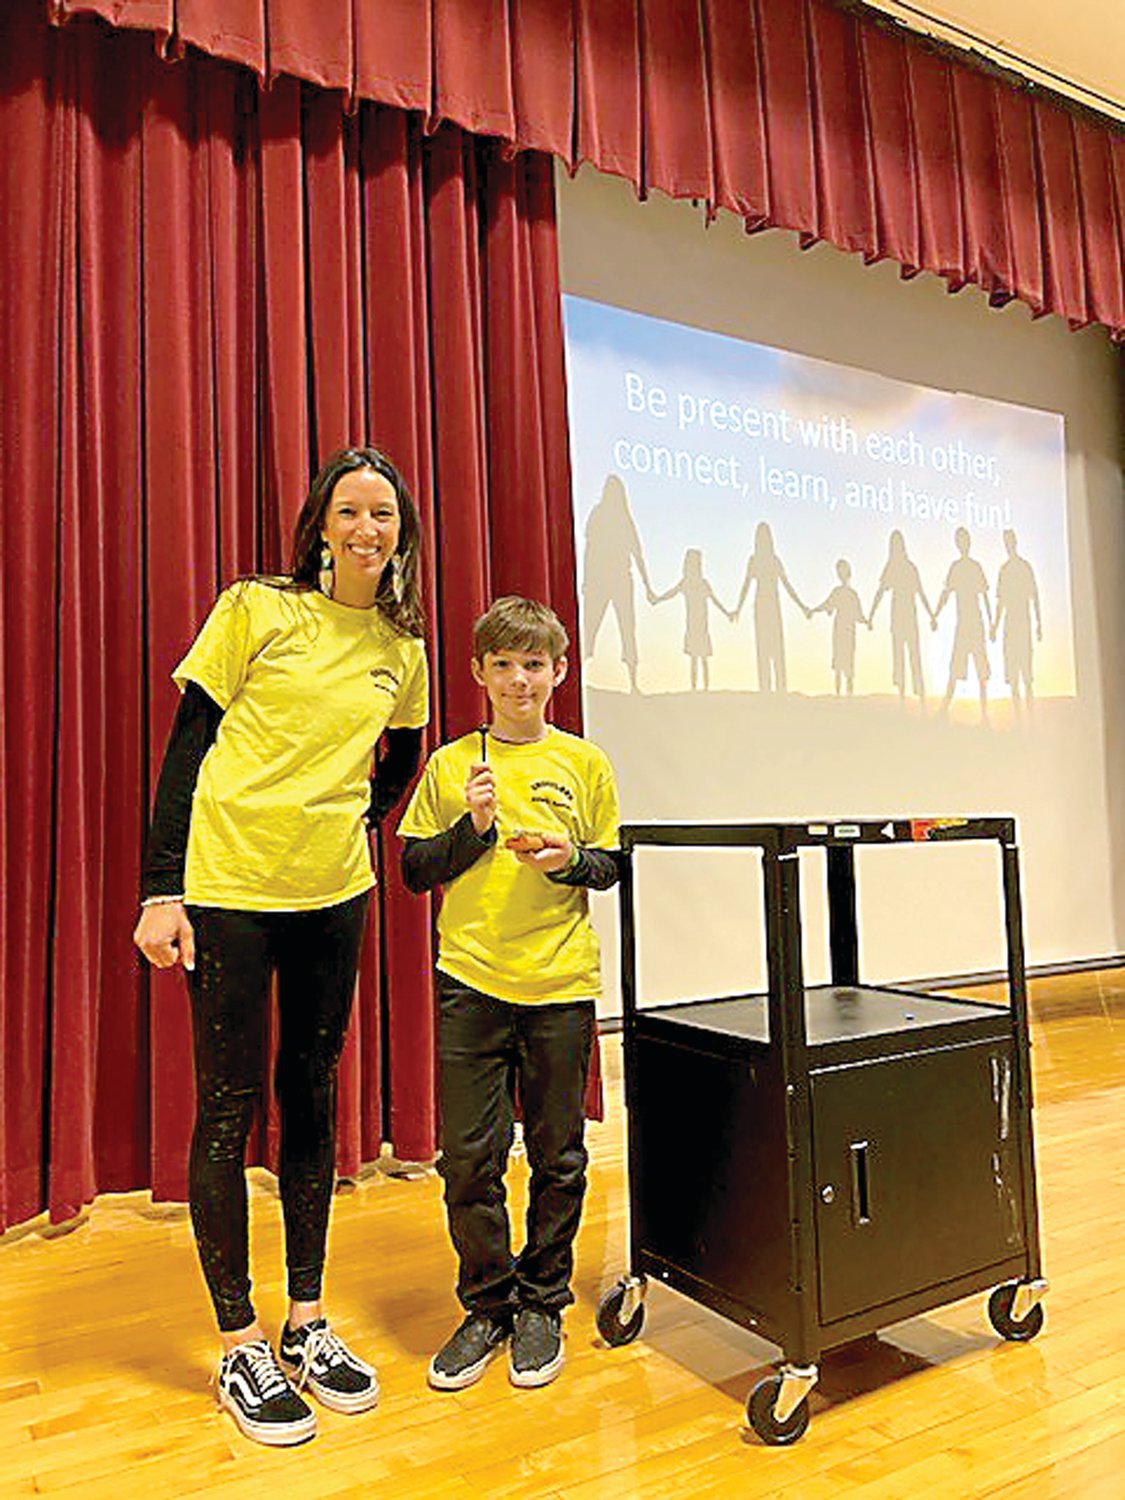 Groveland Elementary student support counselor Michelle Fuentes and fifth-grader Rowan Shaw, Mindfulness Master Club member present moment practices at the school’s Mindfulness Family Fun Night in January. Photograph by Rebecca Fink.